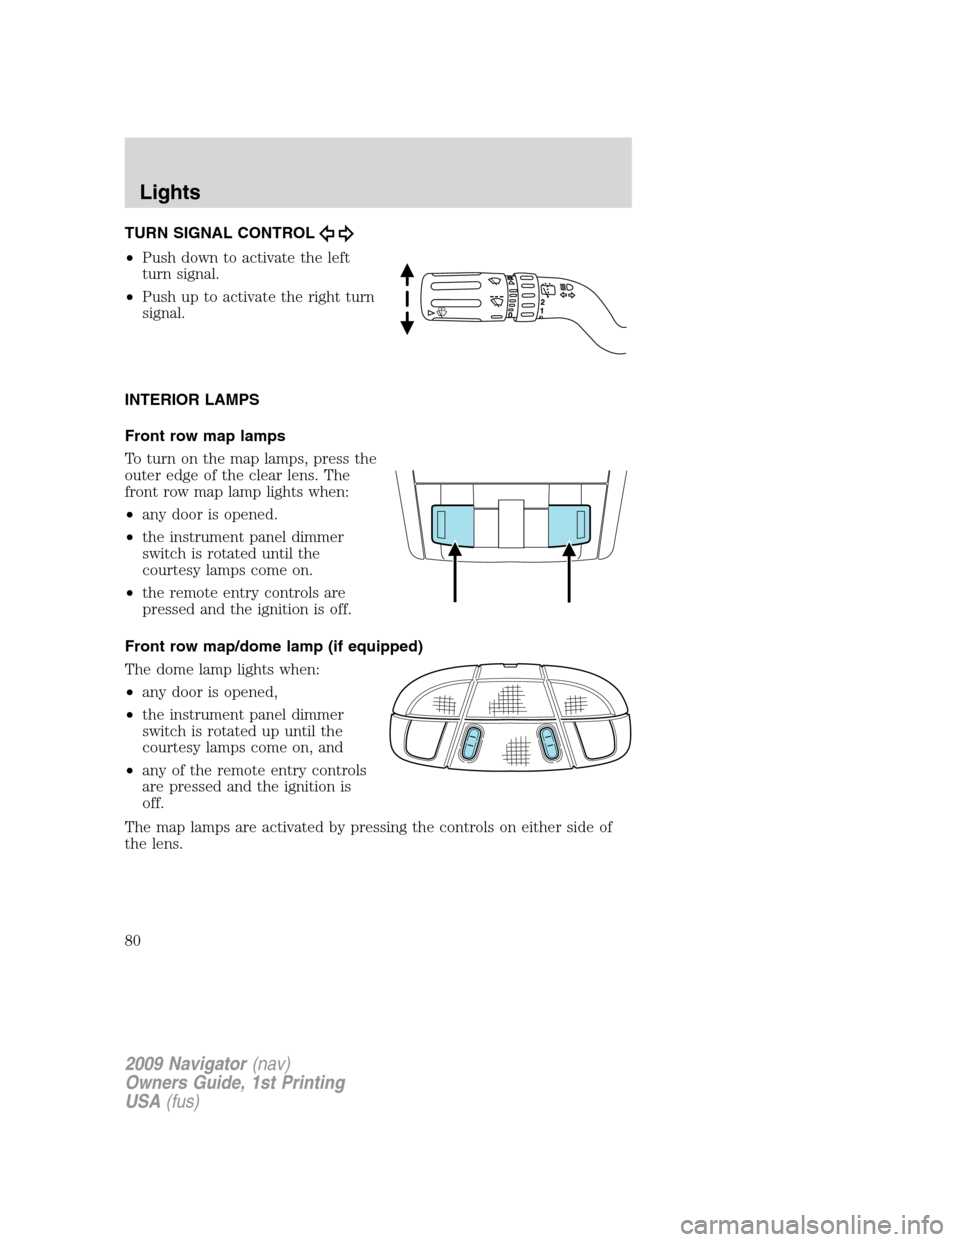 LINCOLN NAVIGATOR 2009 Manual PDF TURN SIGNAL CONTROL
•Push down to activate the left
turn signal.
•Push up to activate the right turn
signal.
INTERIOR LAMPS
Front row map lamps
To turn on the map lamps, press the
outer edge of th